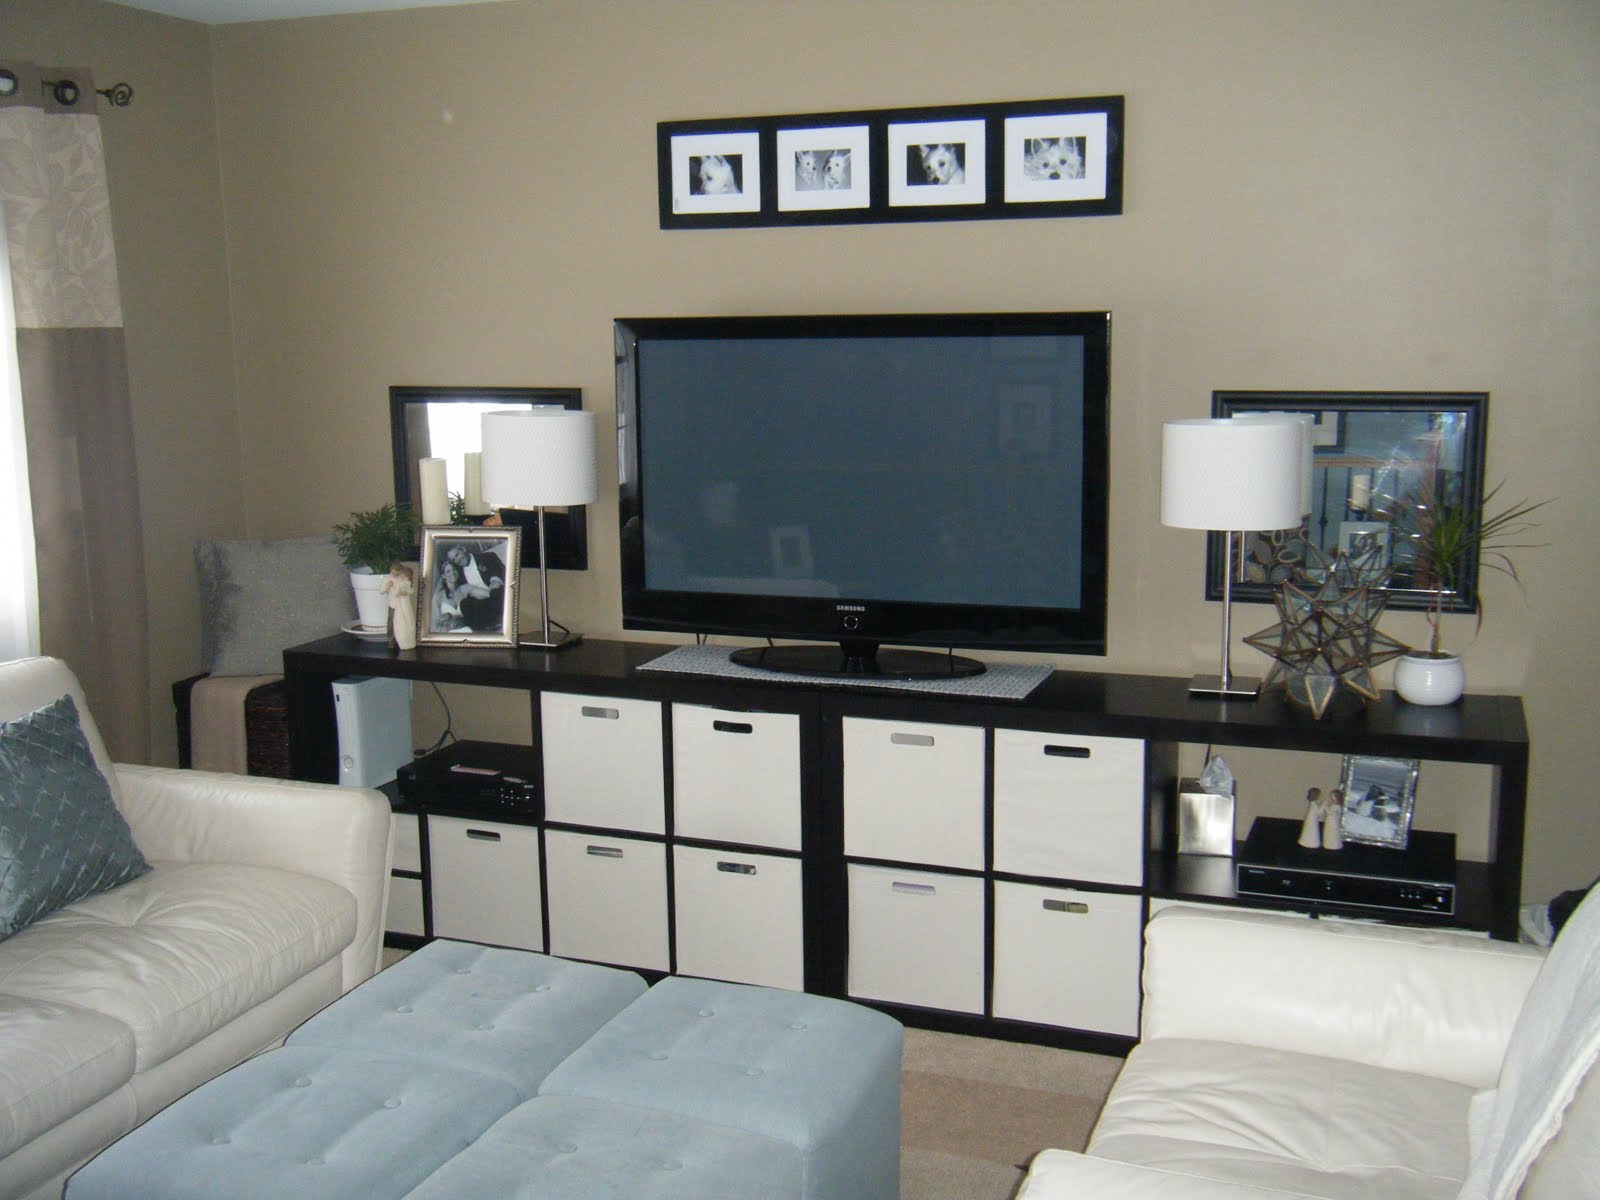 Entertainment Centers on Pinterest | Tv Stands, Ikea and ...